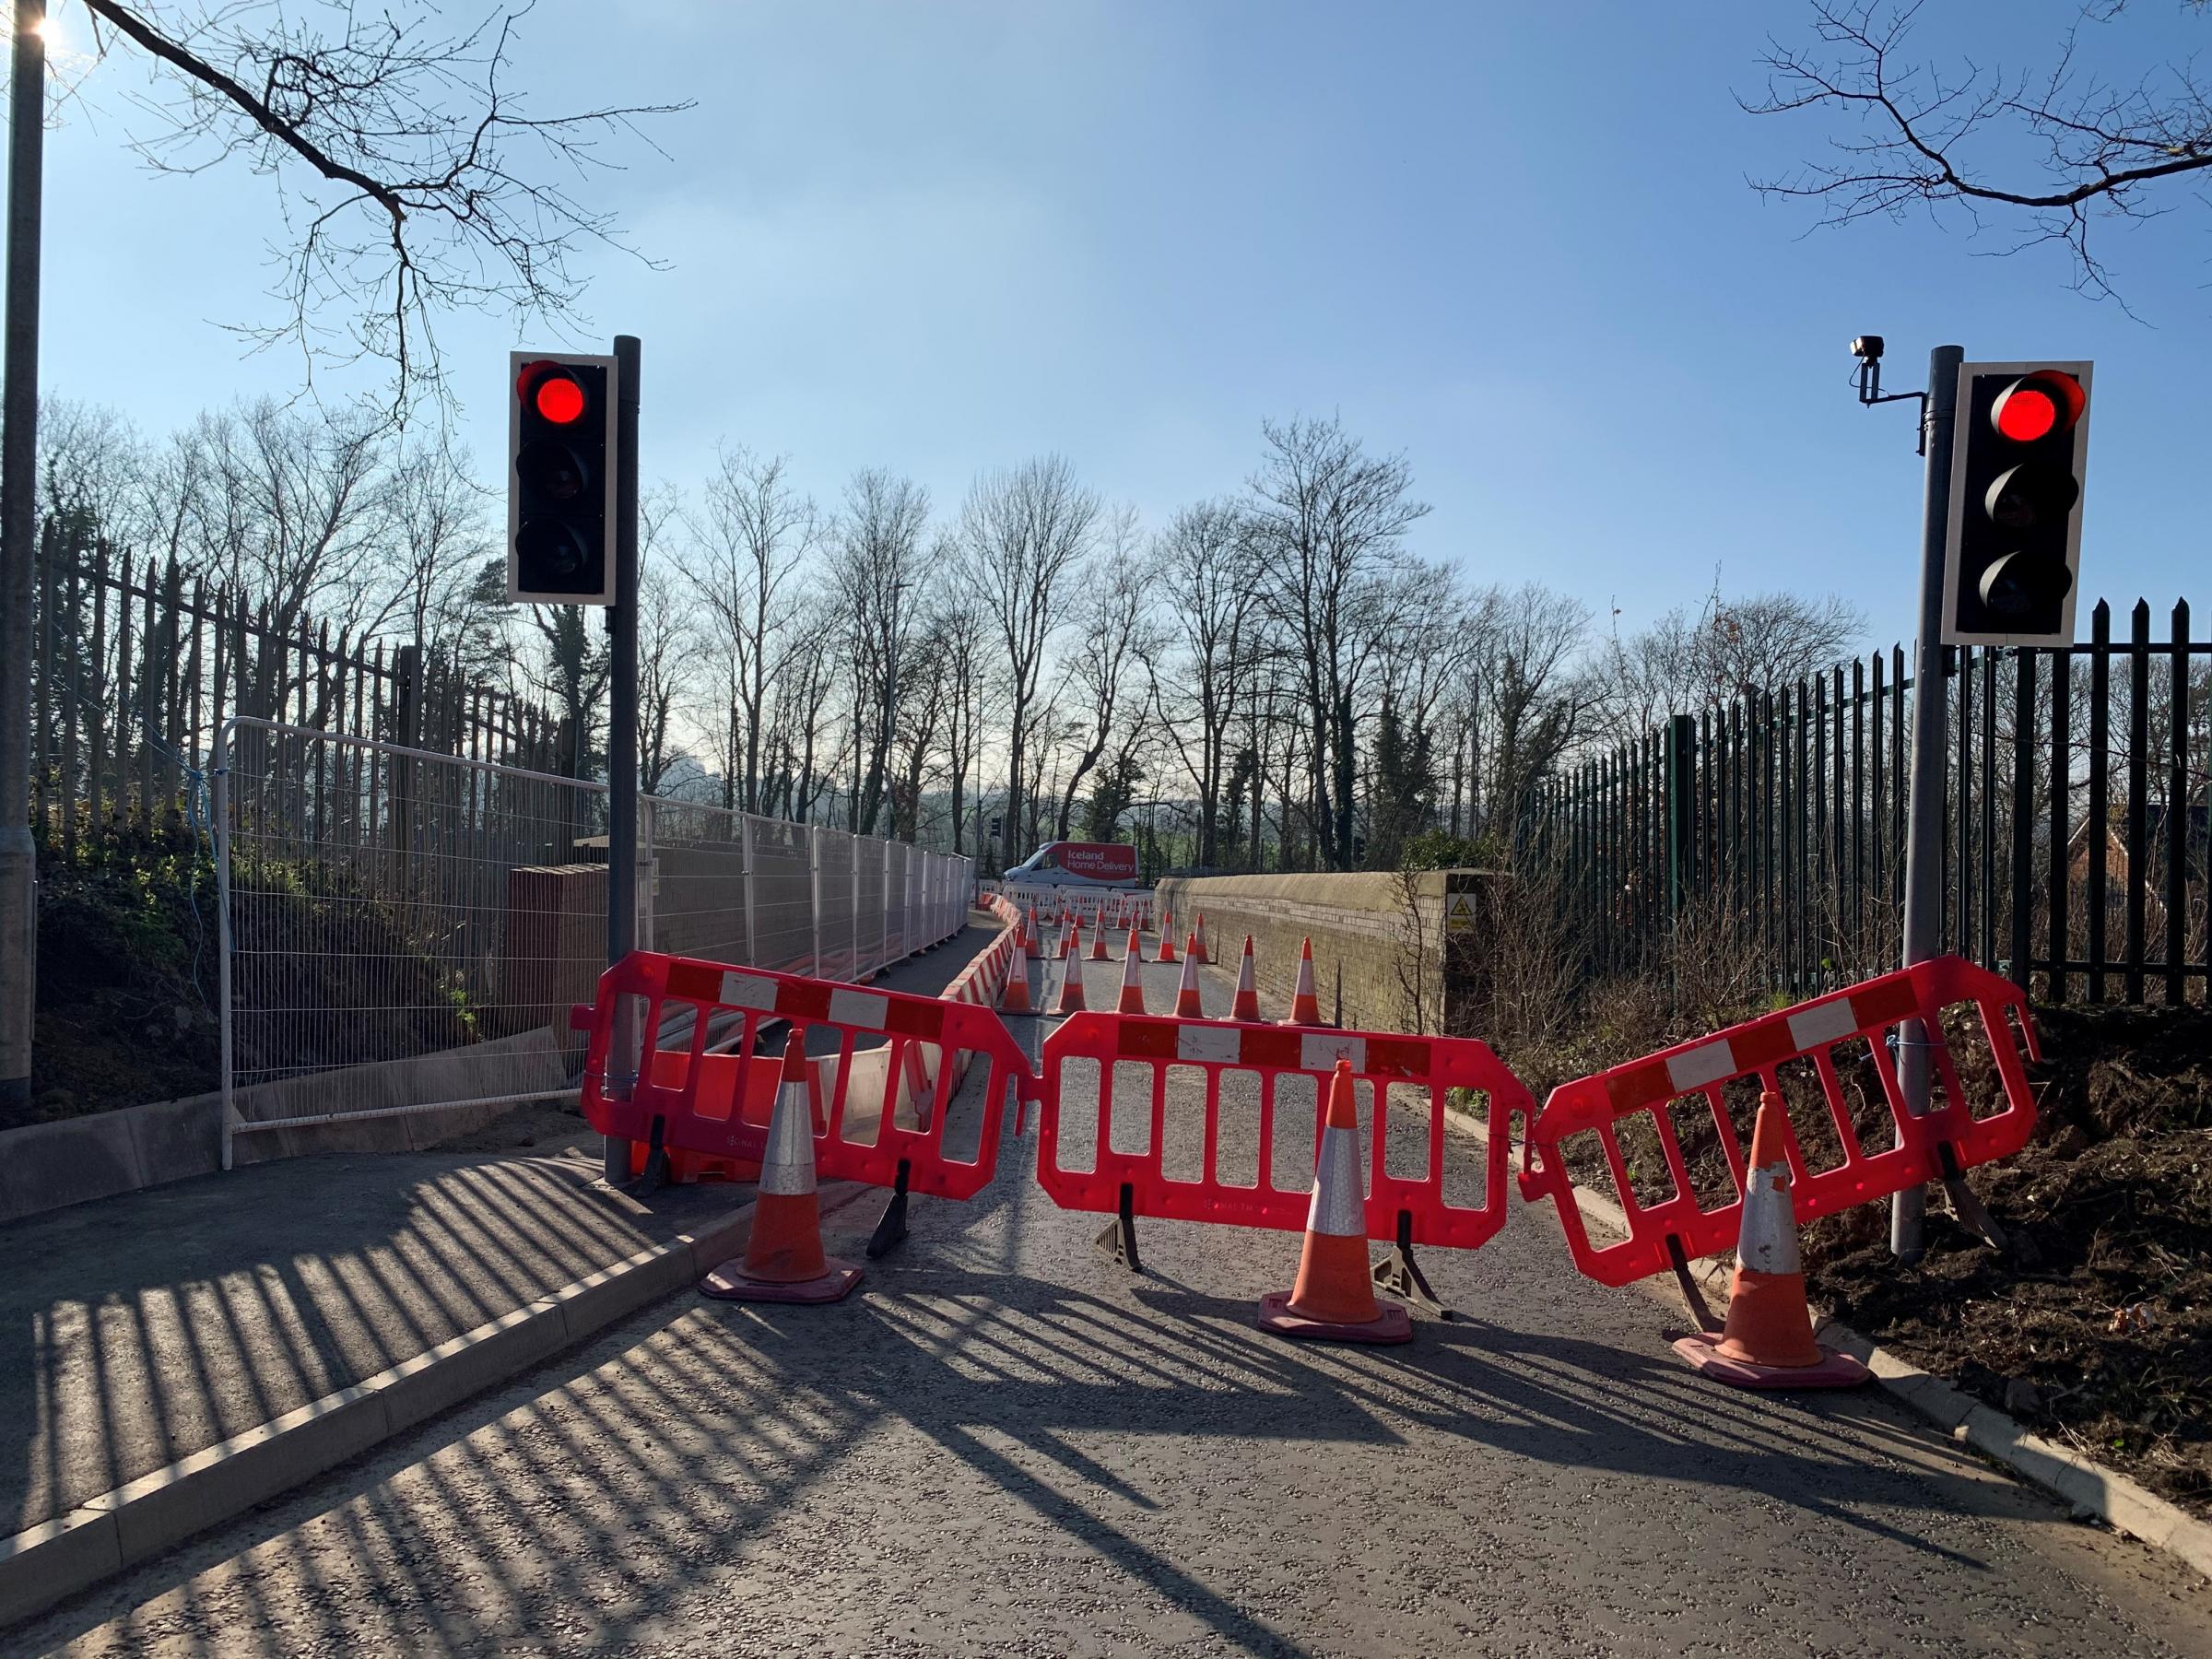 The bridge at the end of Harper Lane has been closed since the end of February, and before that was closed since August